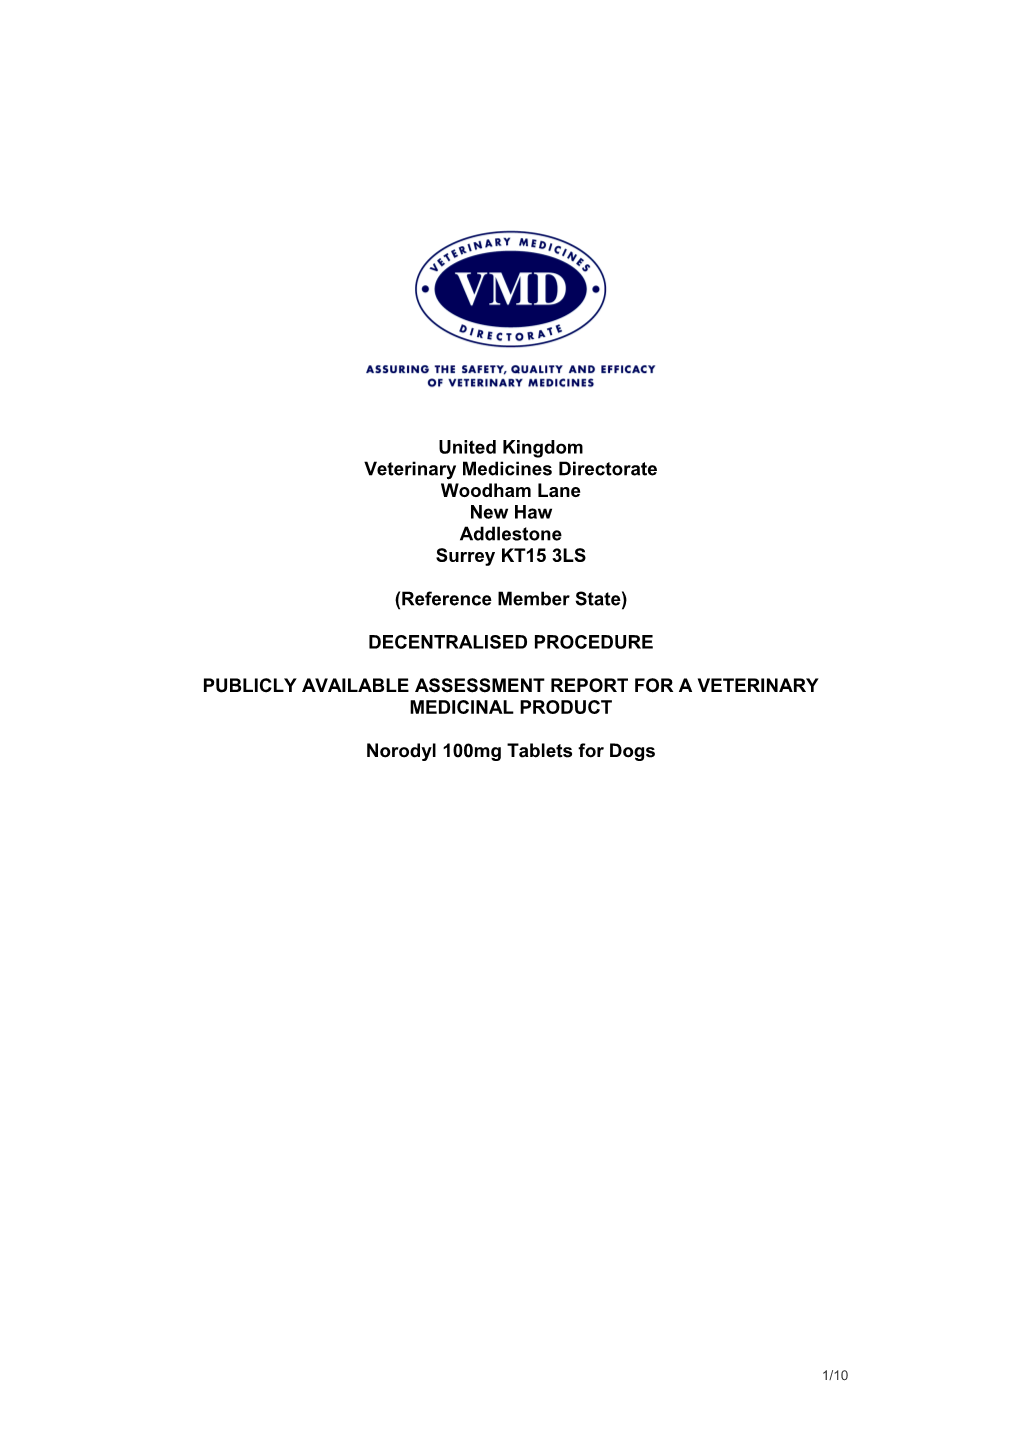 Publicly Available Assessment Report for a Veterinary Medicinal Product s13